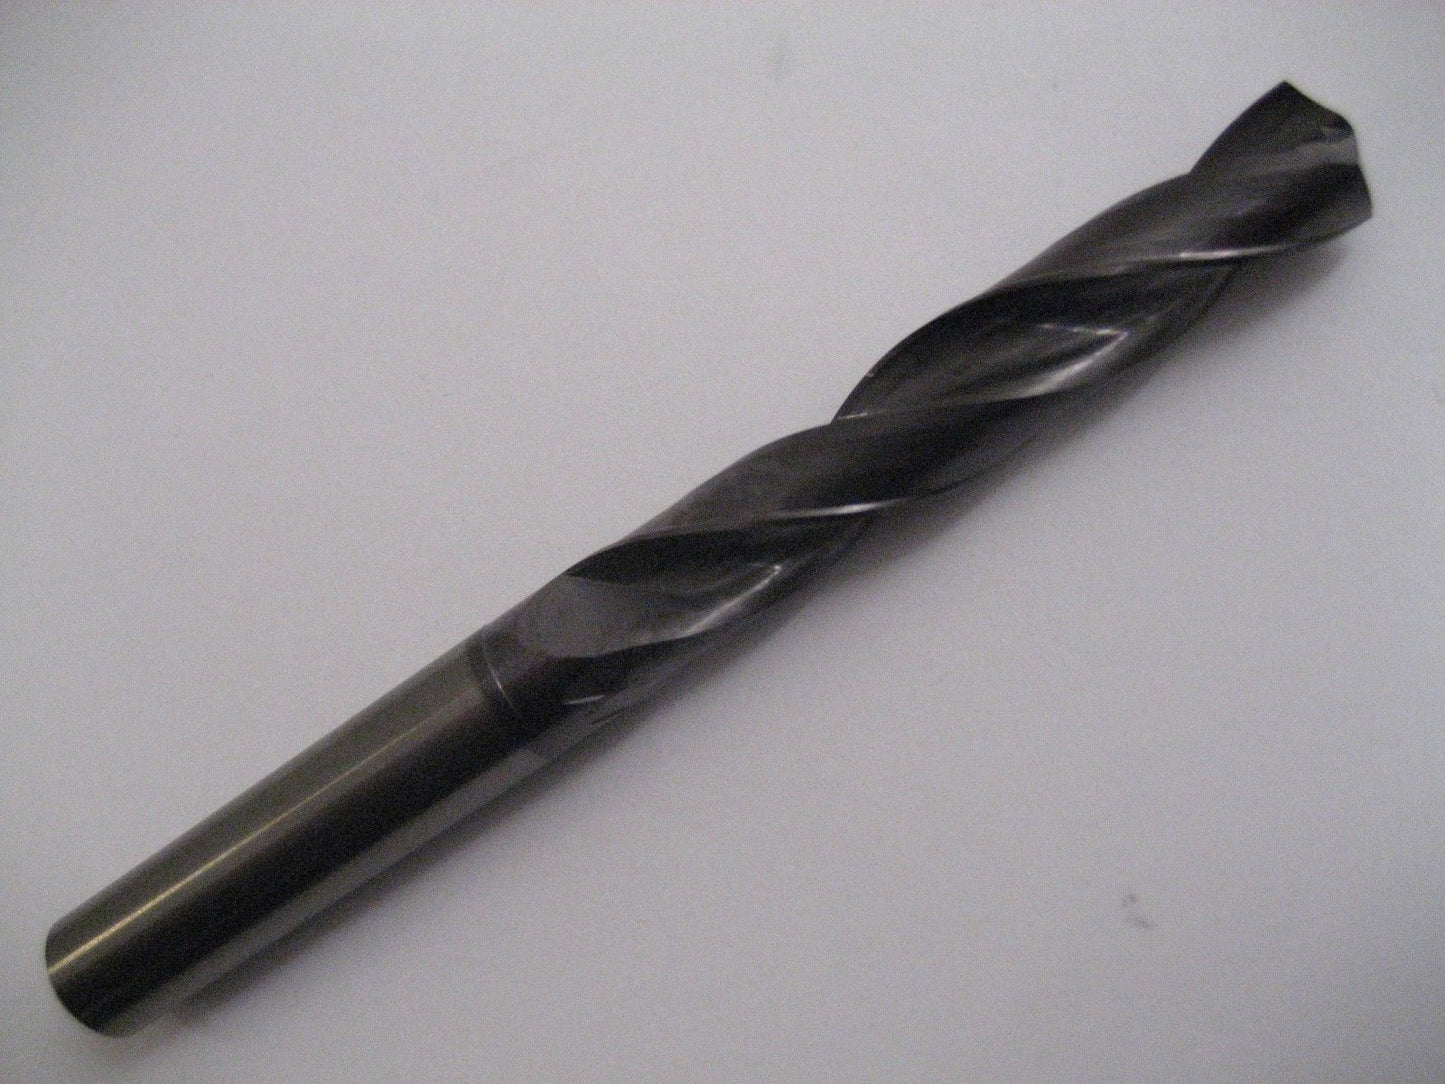 9.4mm CARBIDE 5 x D 2 Fluted TiALN Coated Gold Drill